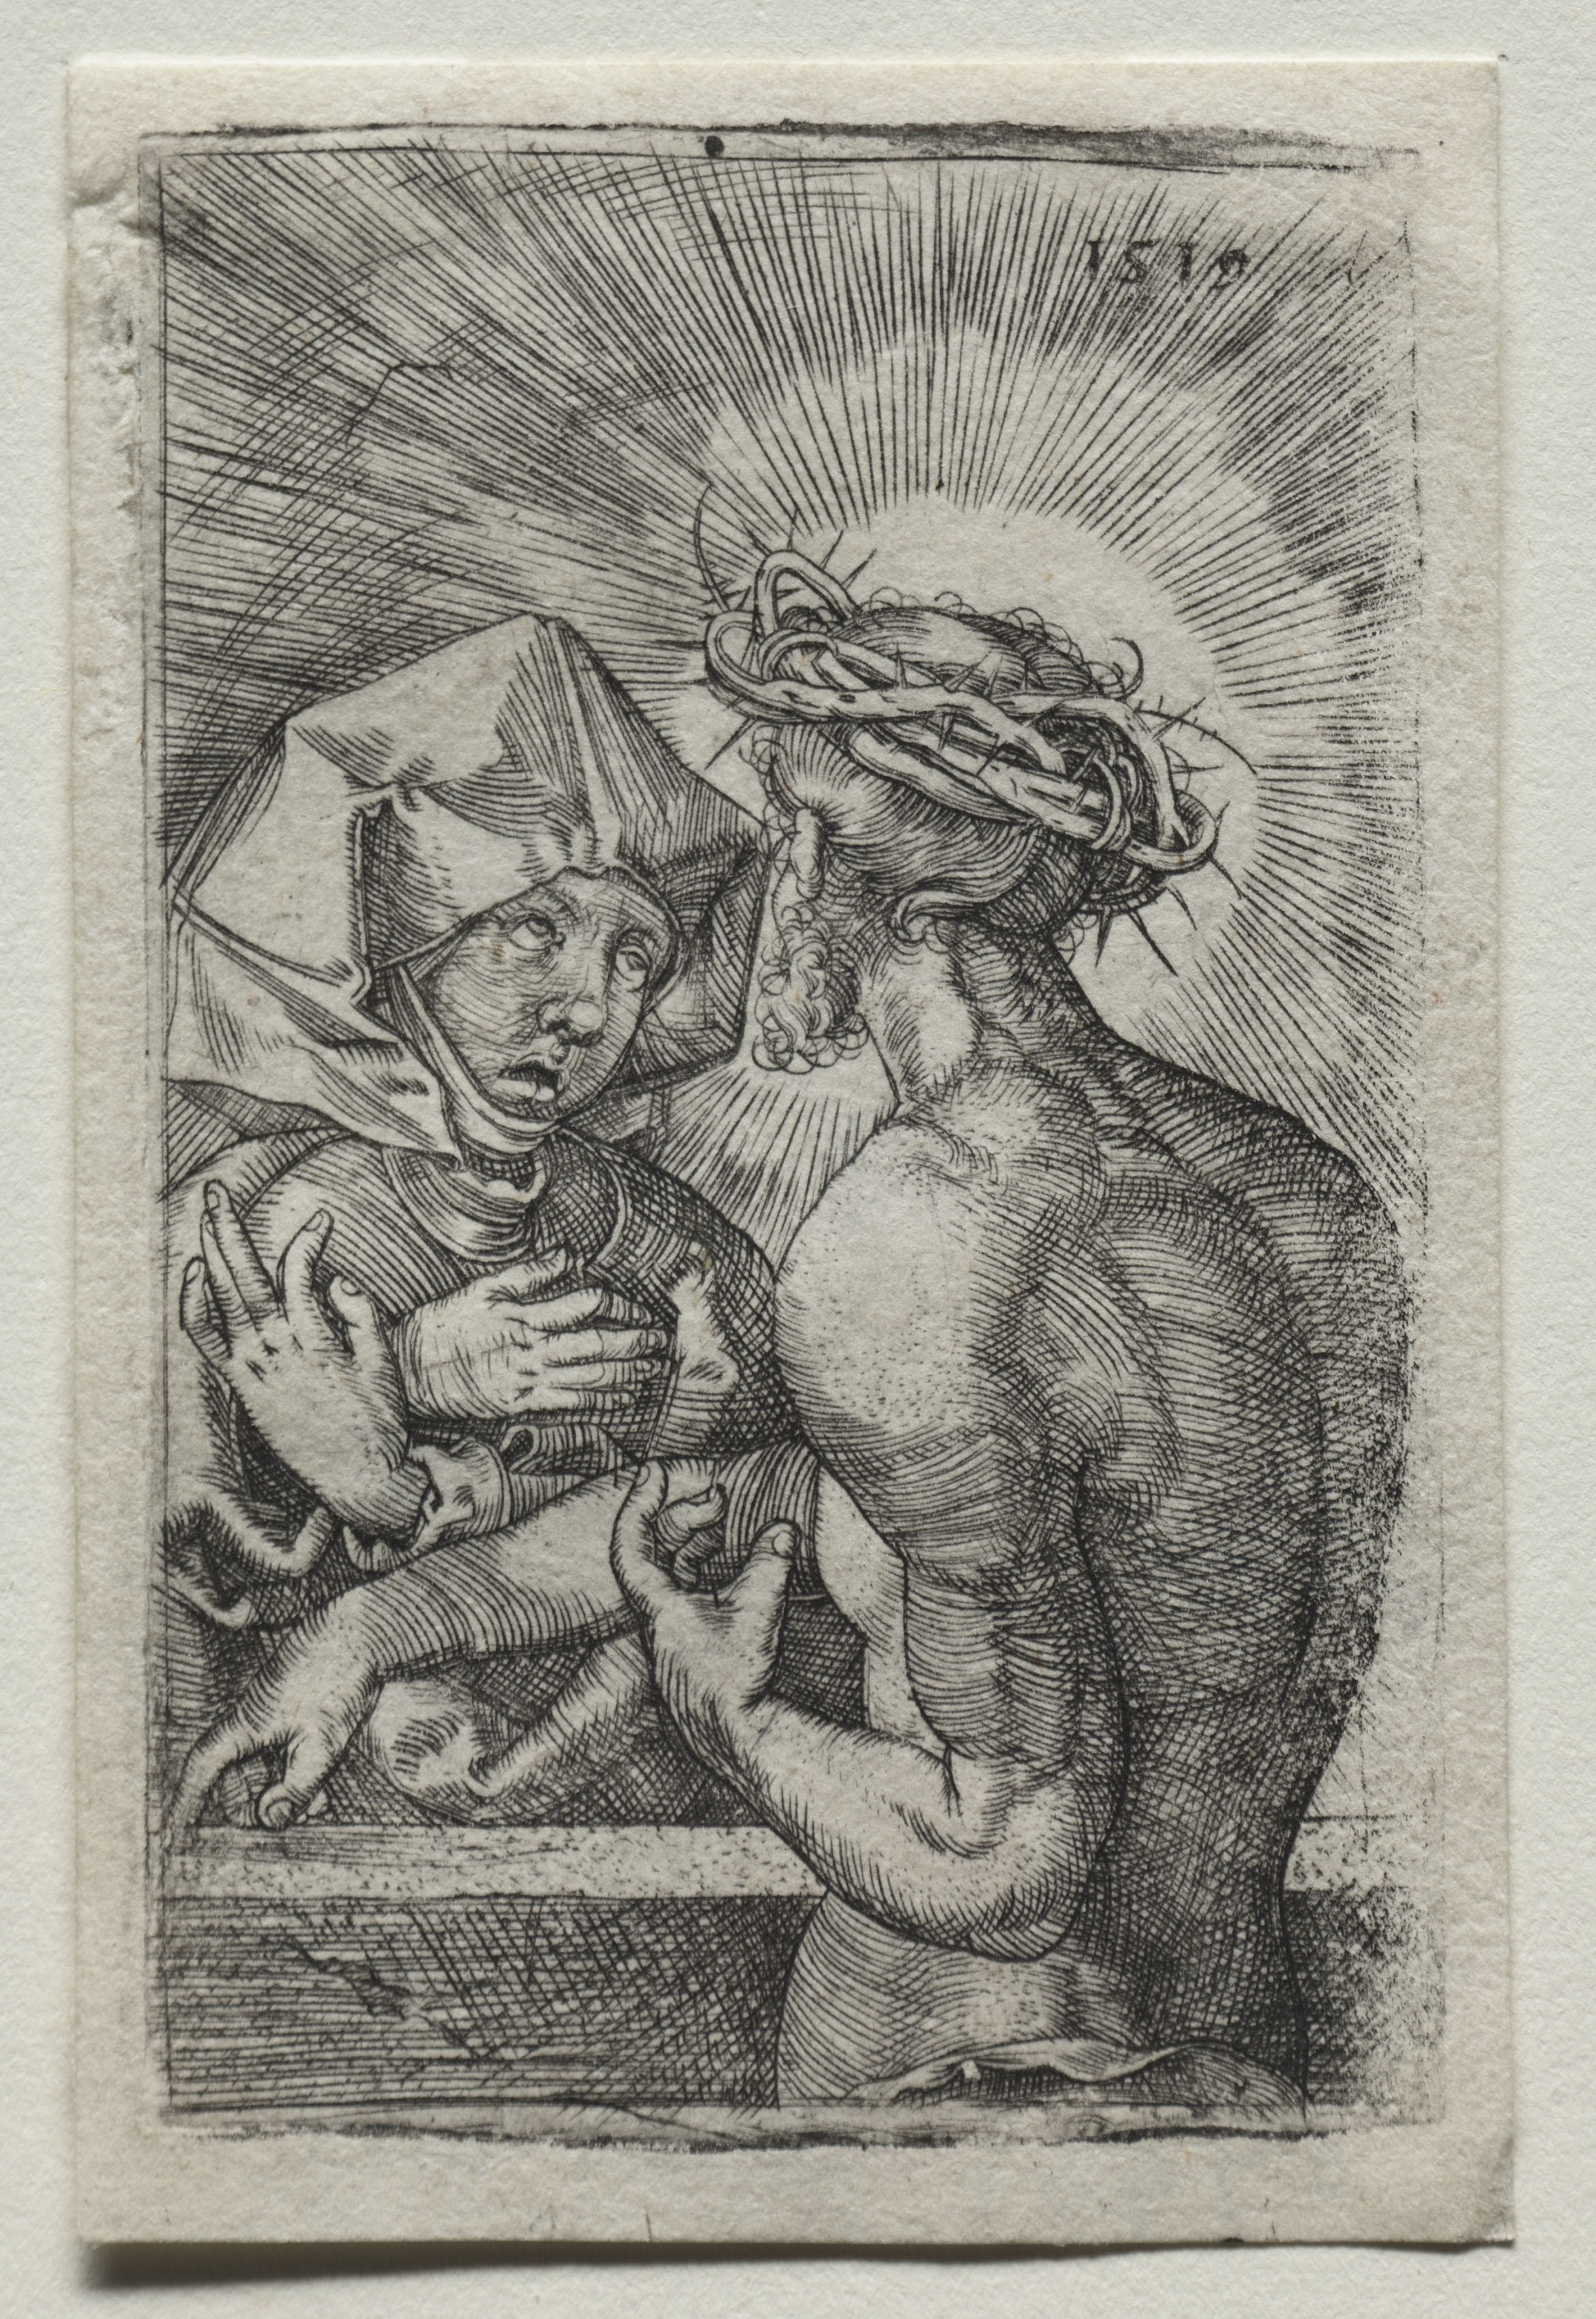 Christ and the Virgin